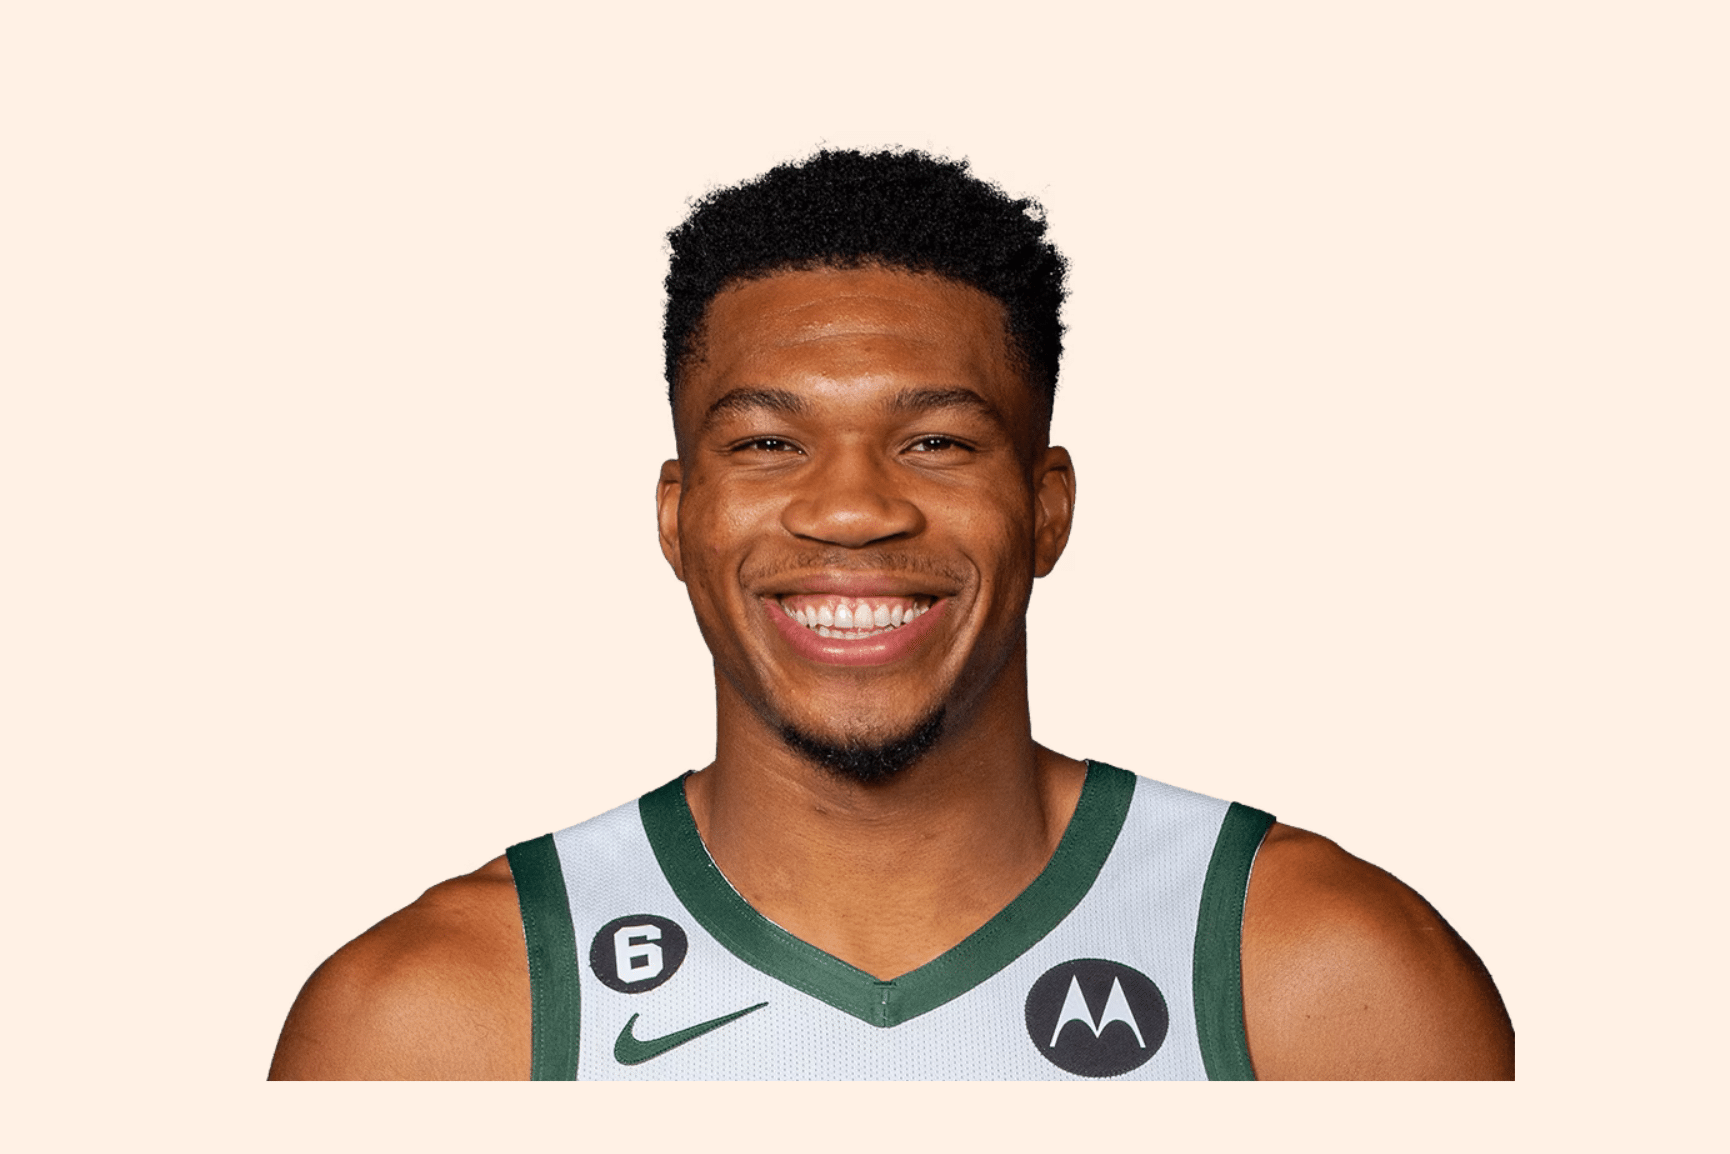 Giannis Antetokounmpo Stats: Height, Weight & Position